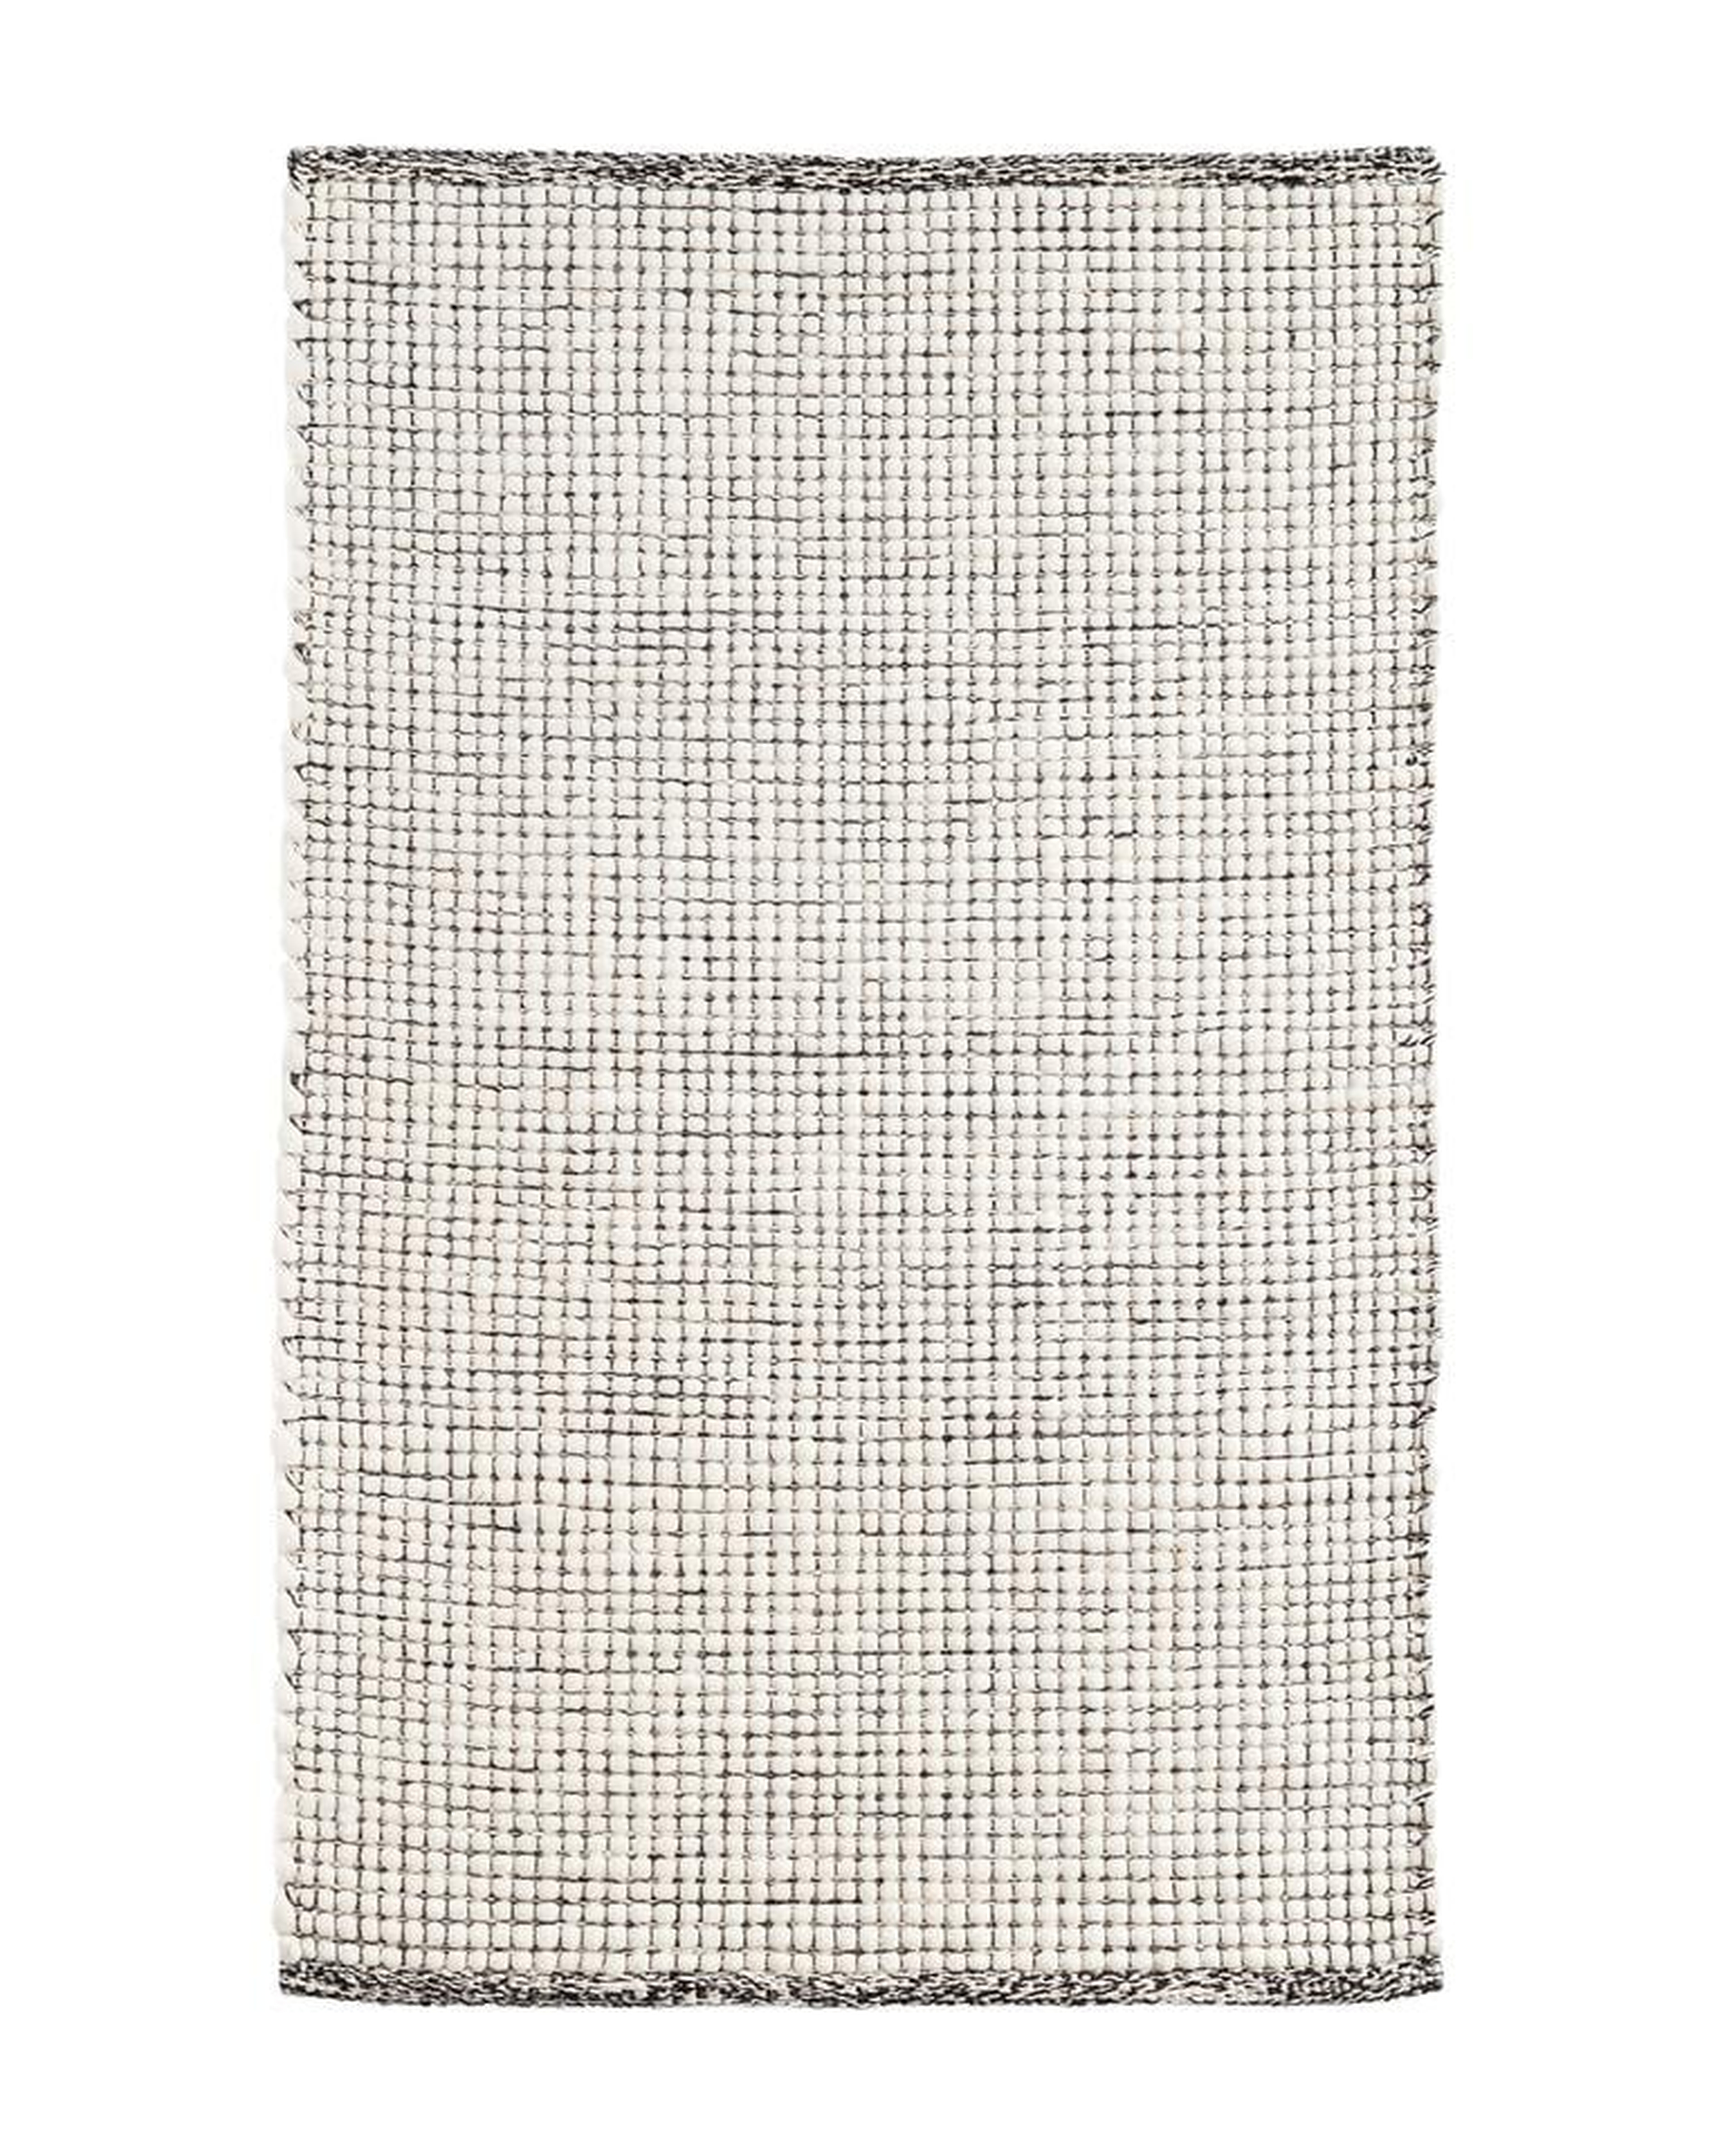 NETWORK BLACK WOVEN RUG, 5' x 8' - McGee & Co.